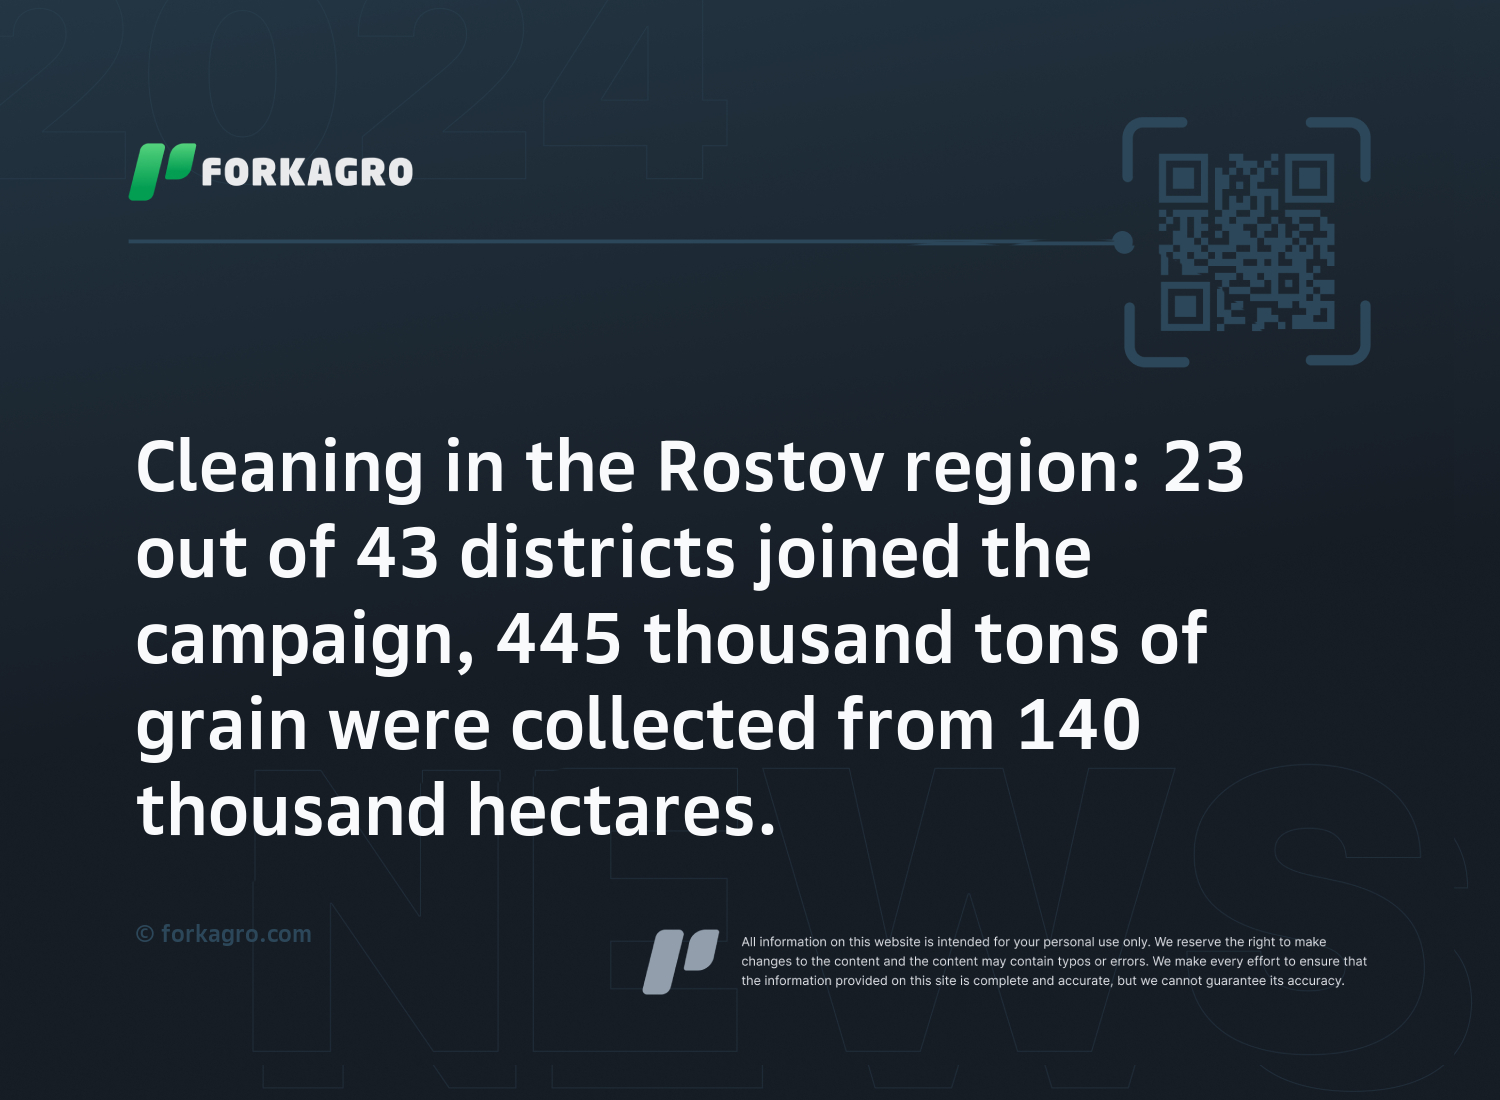 Cleaning in the Rostov region: 23 out of 43 districts joined the campaign, 445 thousand tons of grain were collected from 140 thousand hectares.